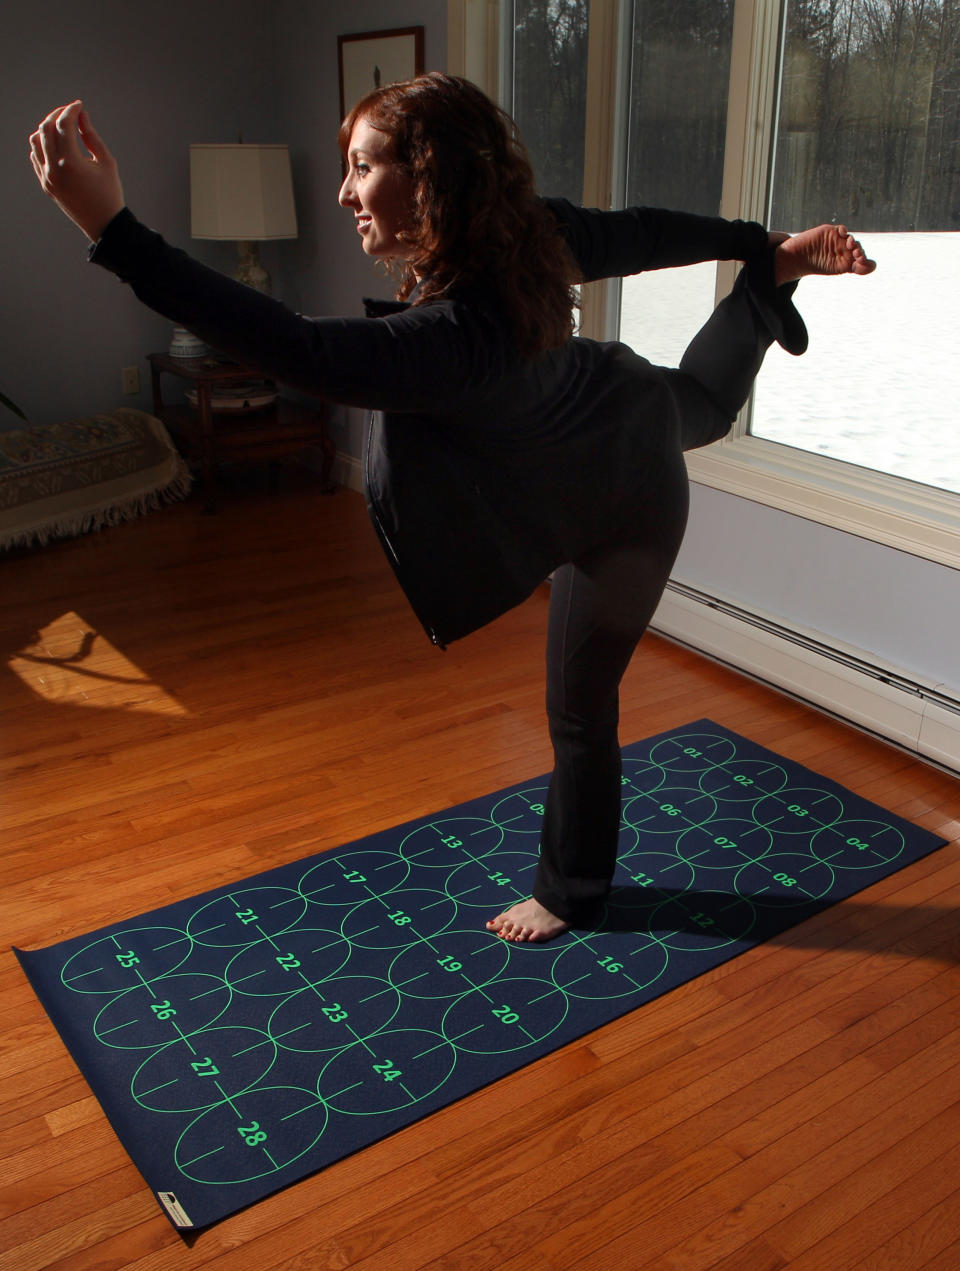 In this March 7, 2014 photo, Elizabeth Morrow poses on her specially designed Yoga by Numbers mat in Bow, N.H. The mat gives true yoga beginners a step-by-step roadmap to learn poses at their own pace. (AP Photo/Jim Cole)